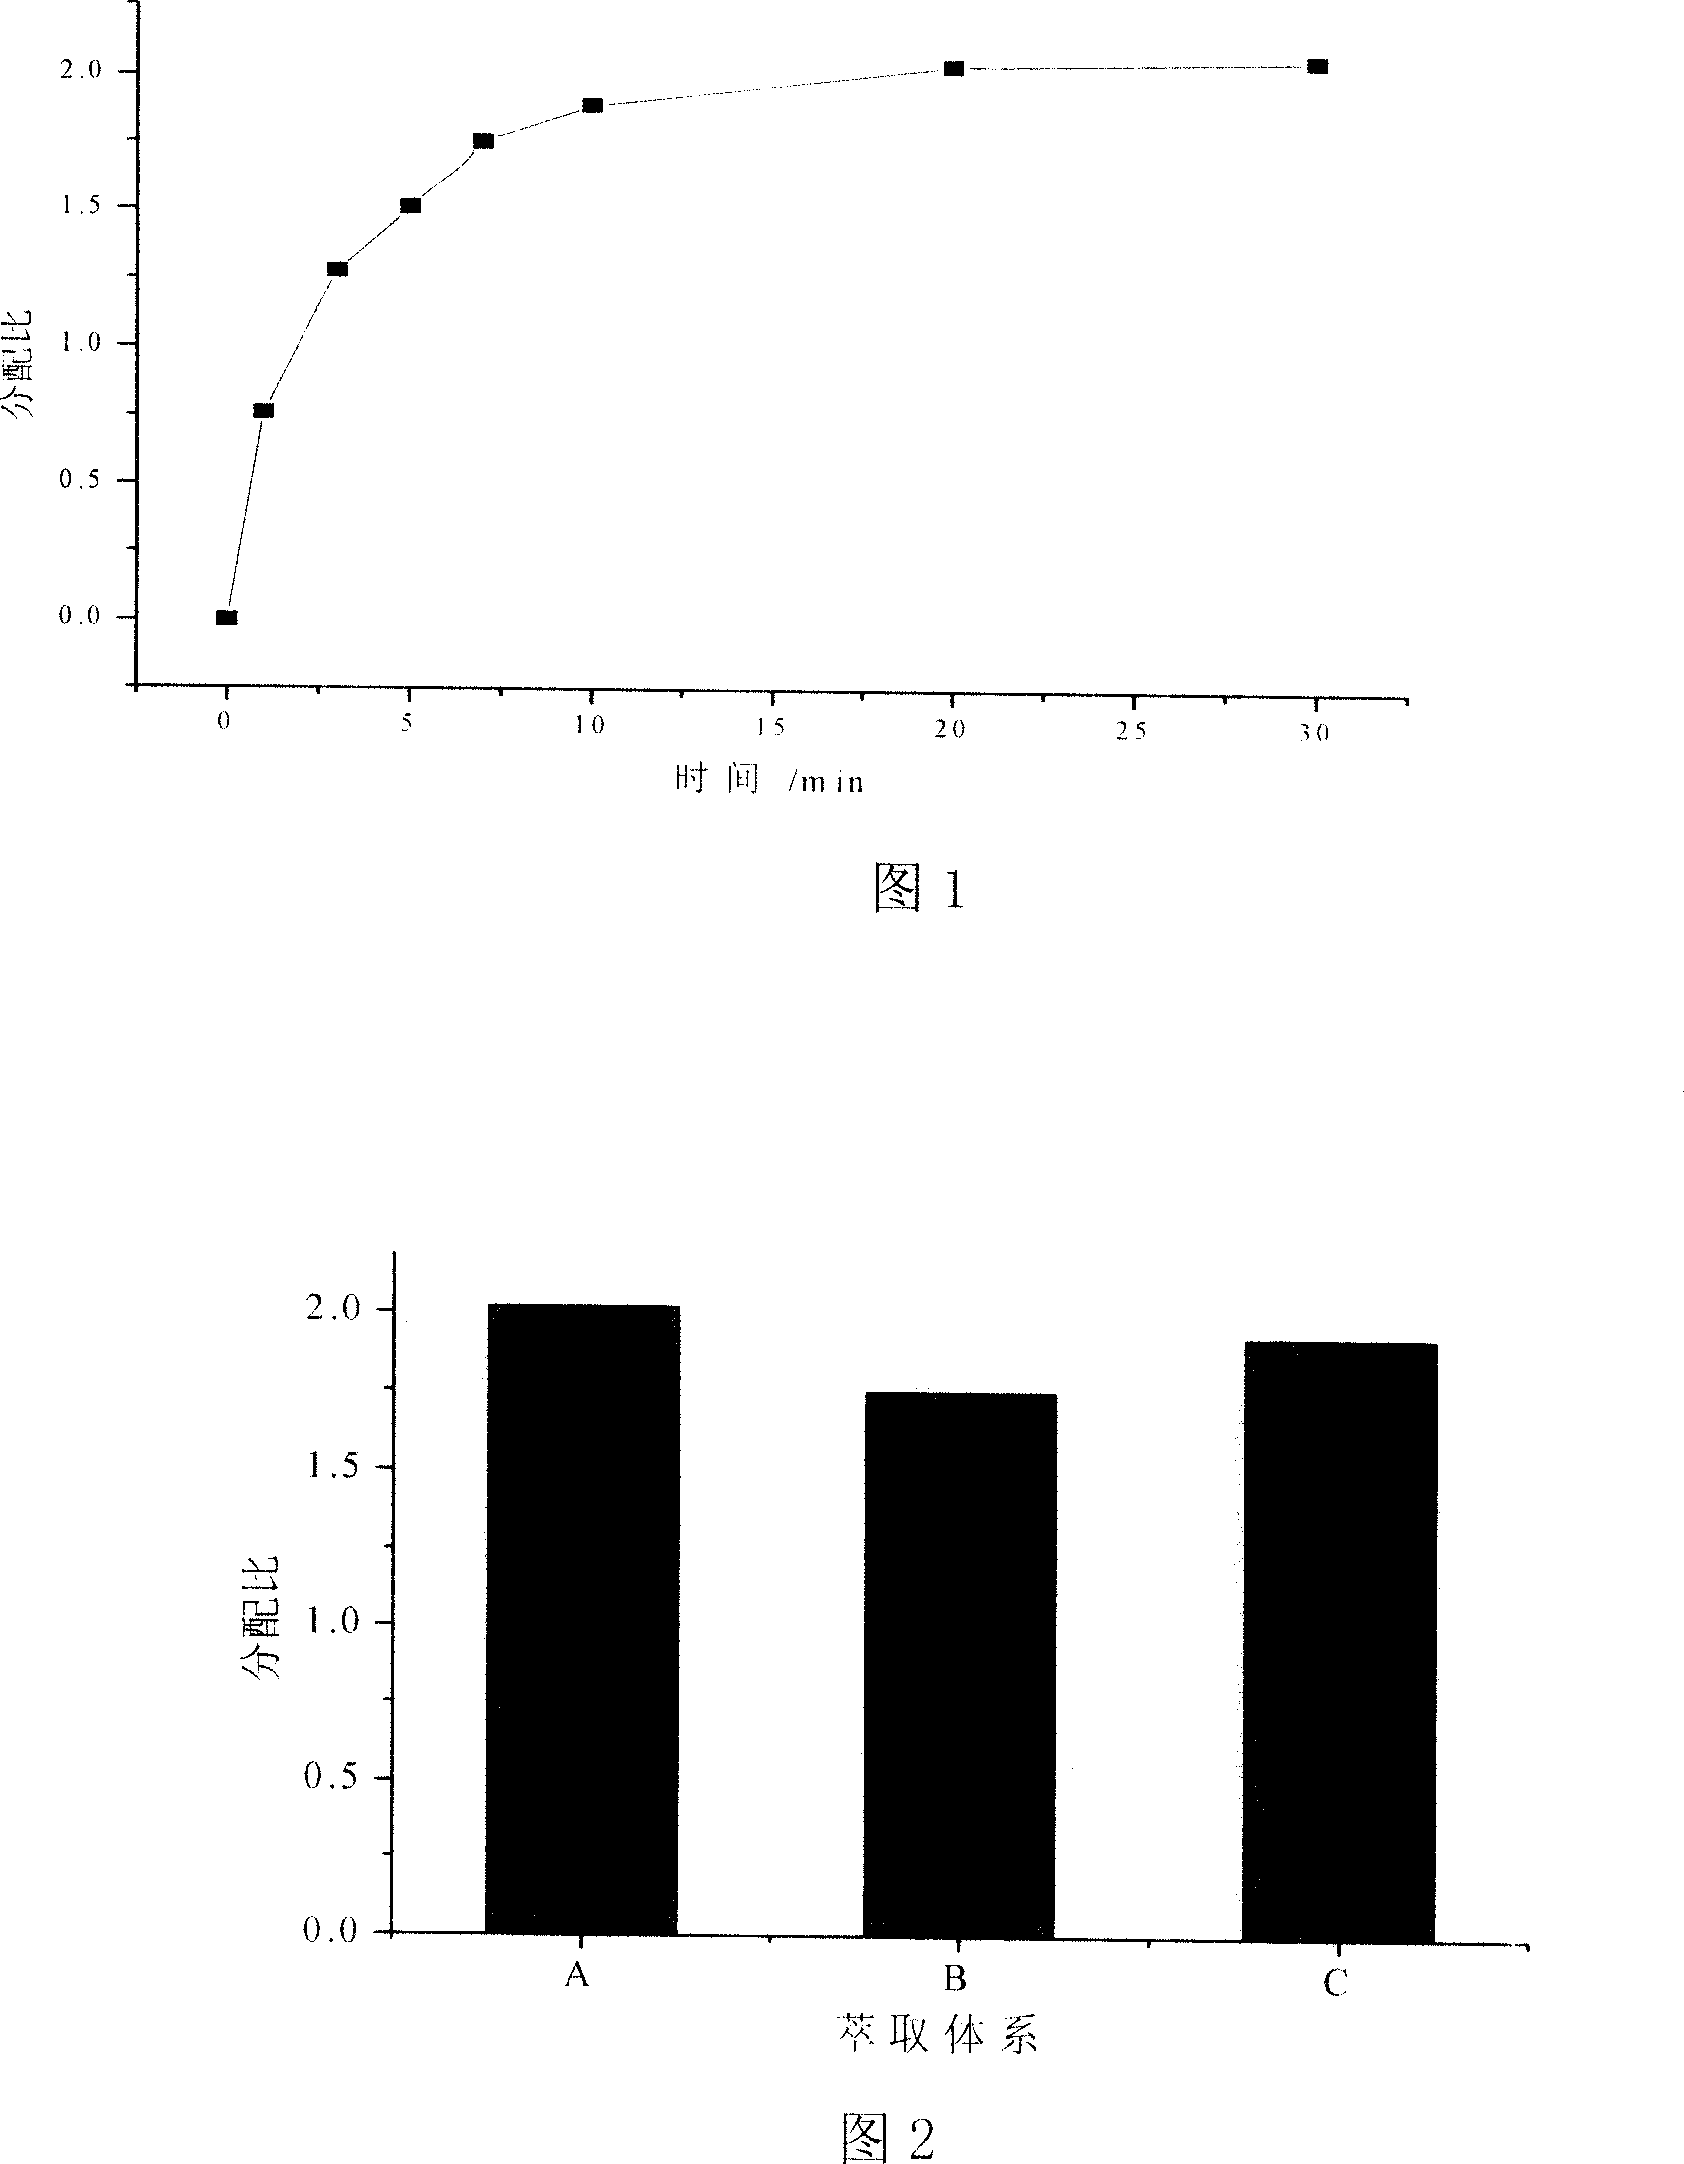 Process for recovering dimethyl formyl amine from waste water using ion liquid extracting process